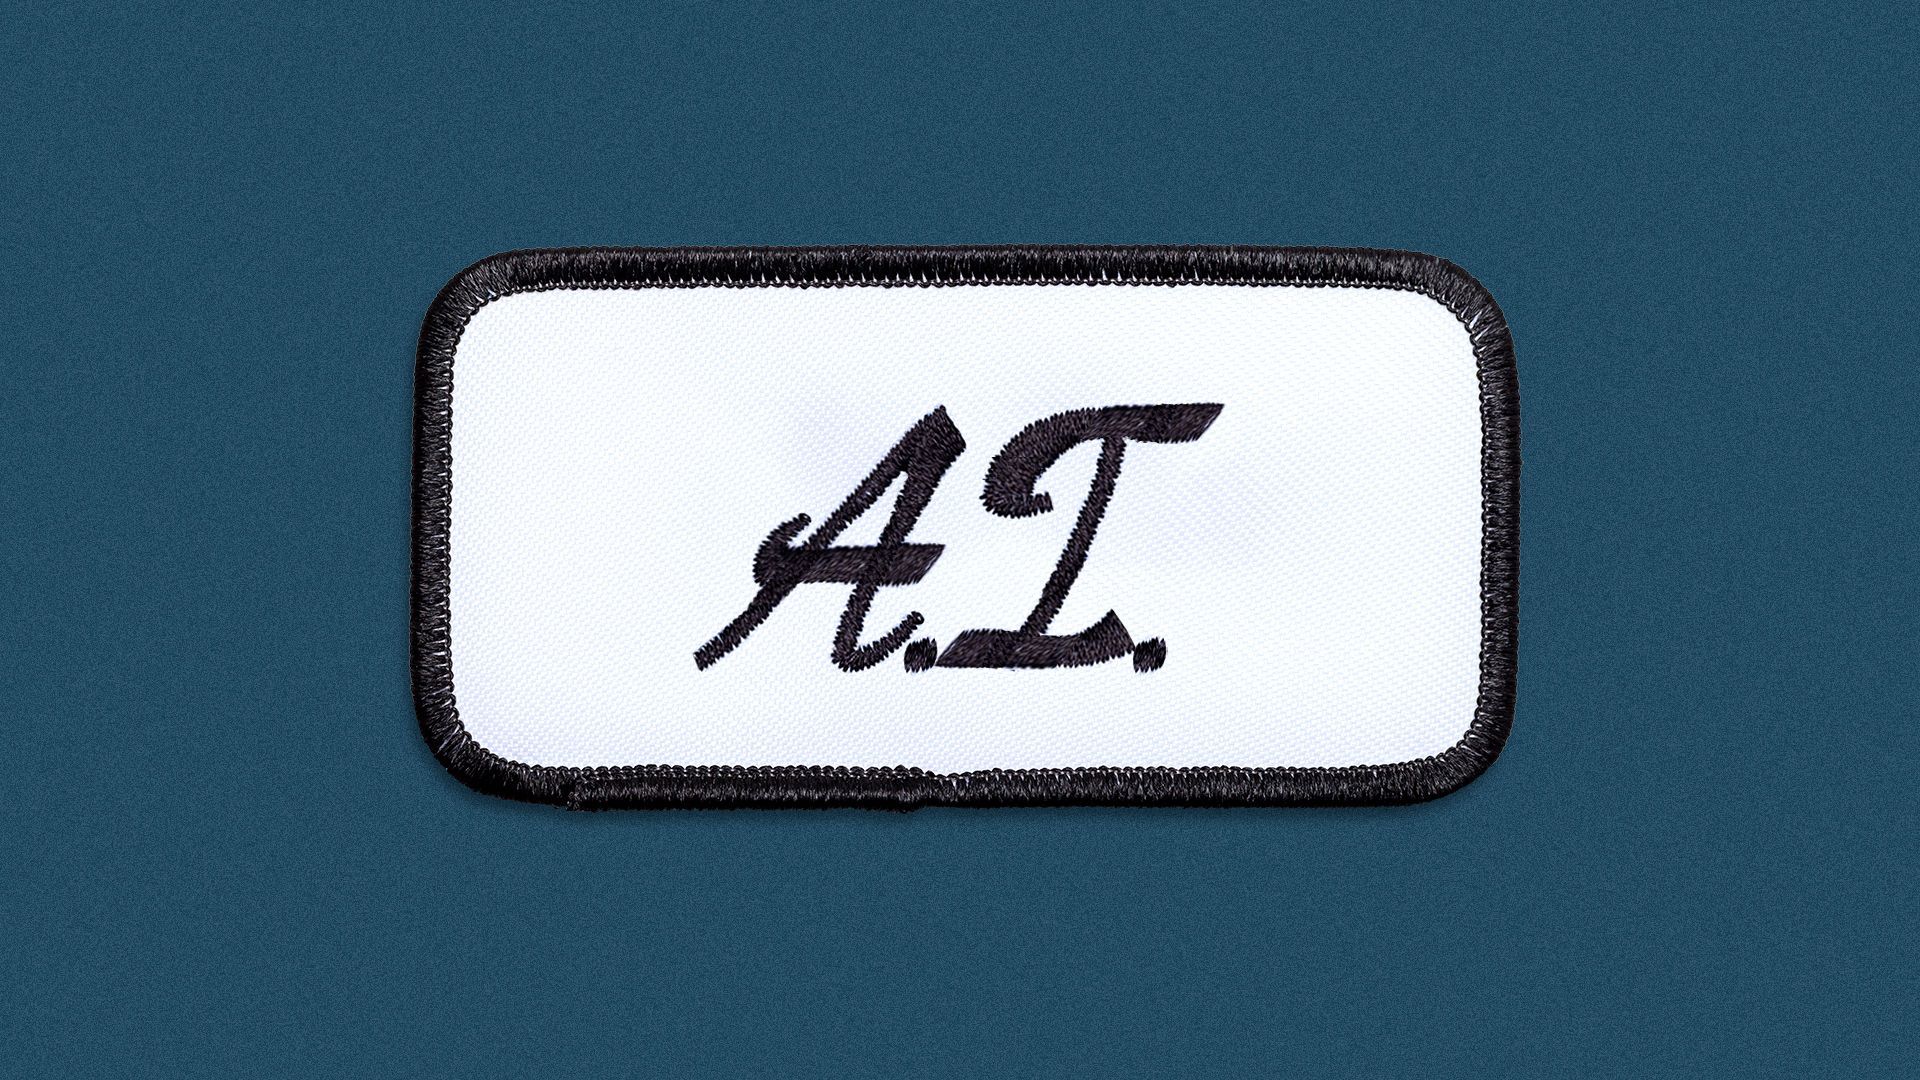 Illustration of a uniform name patch with the letters "A.I." stitched